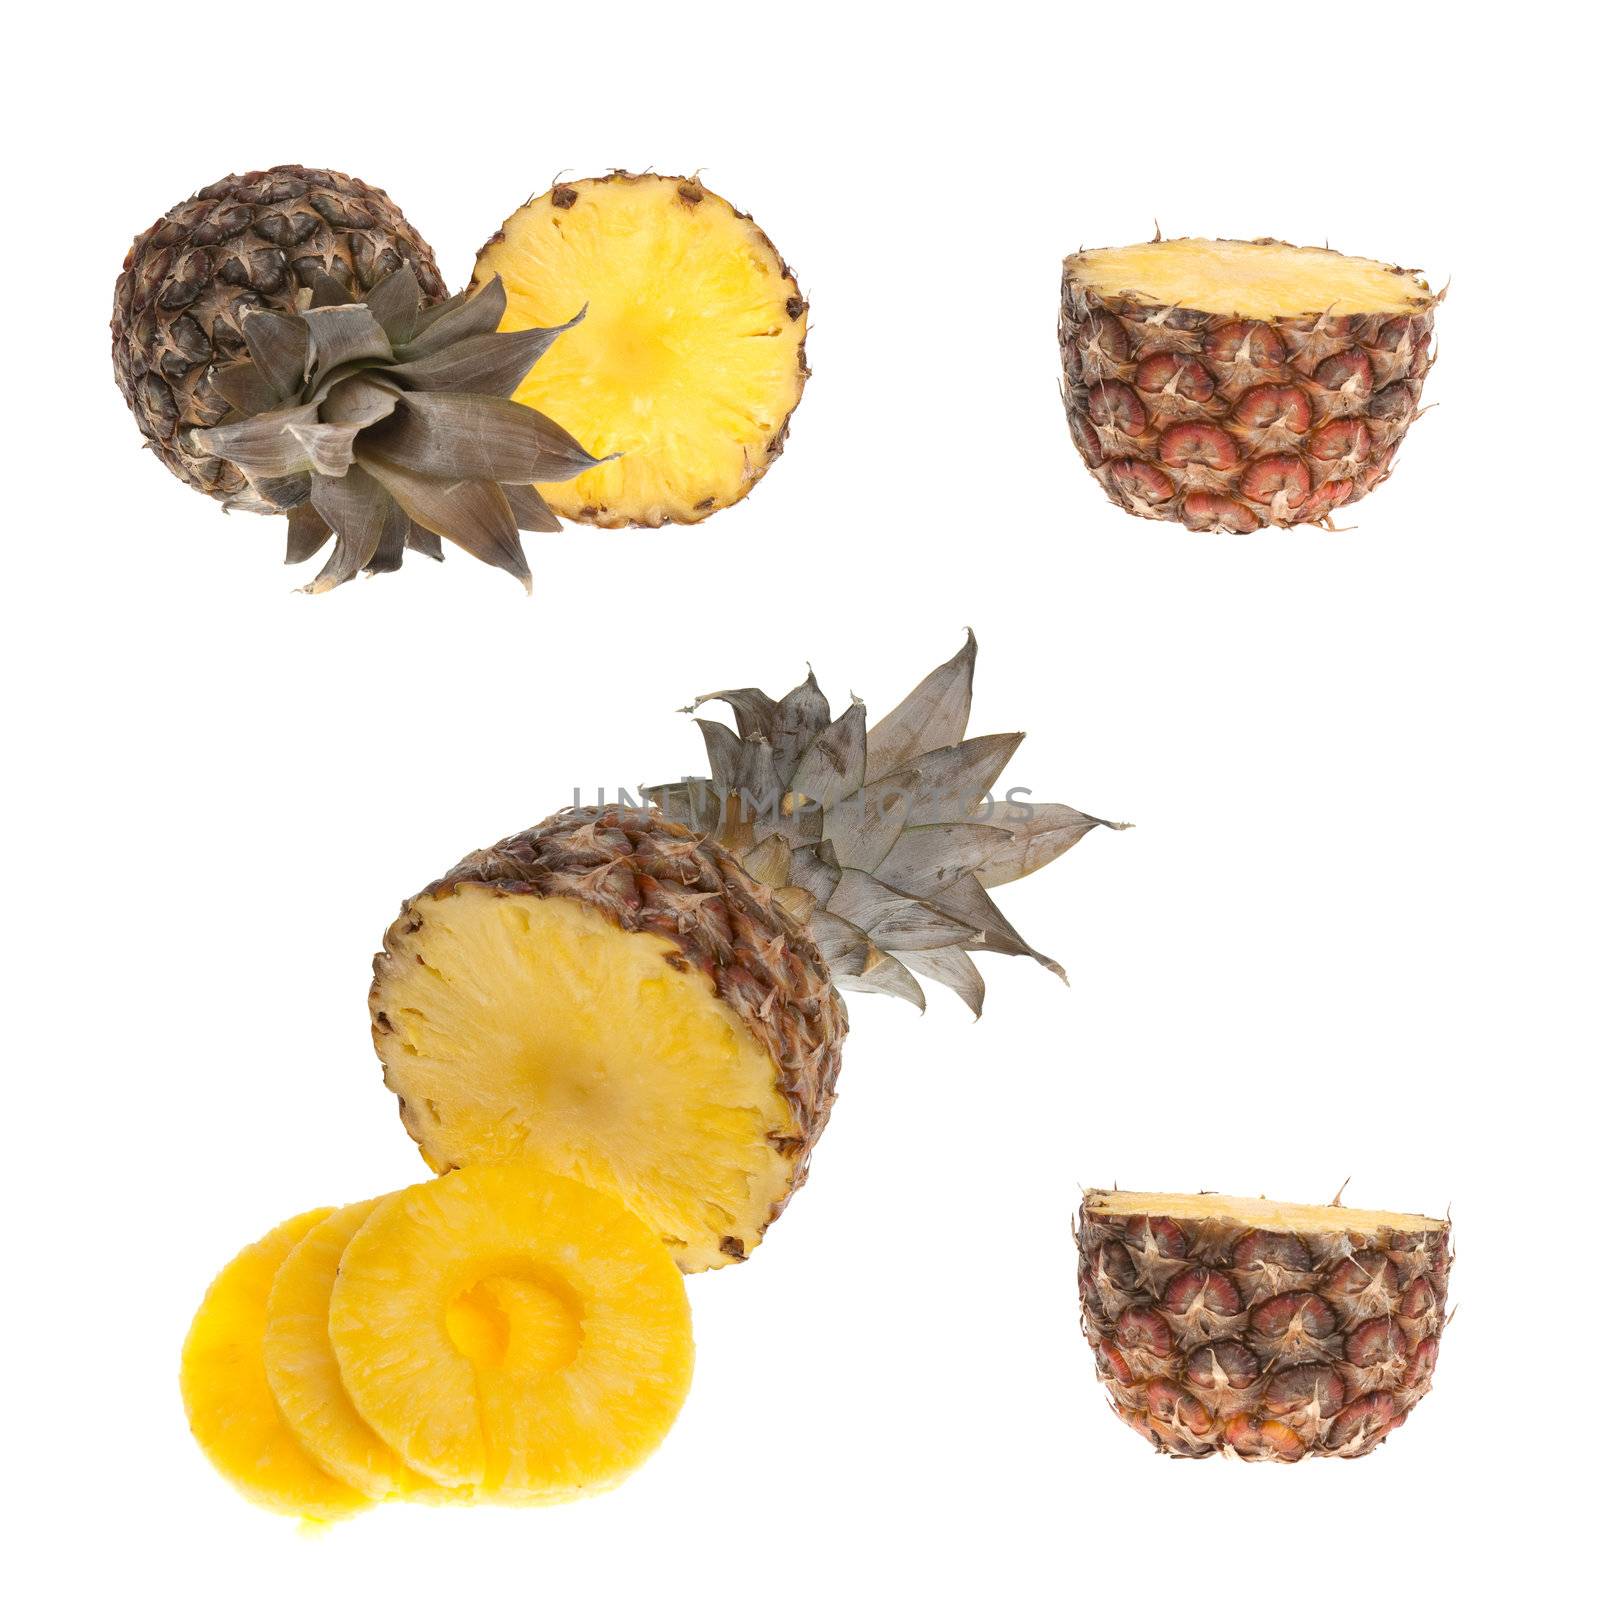 Whole and half pinapple by homydesign